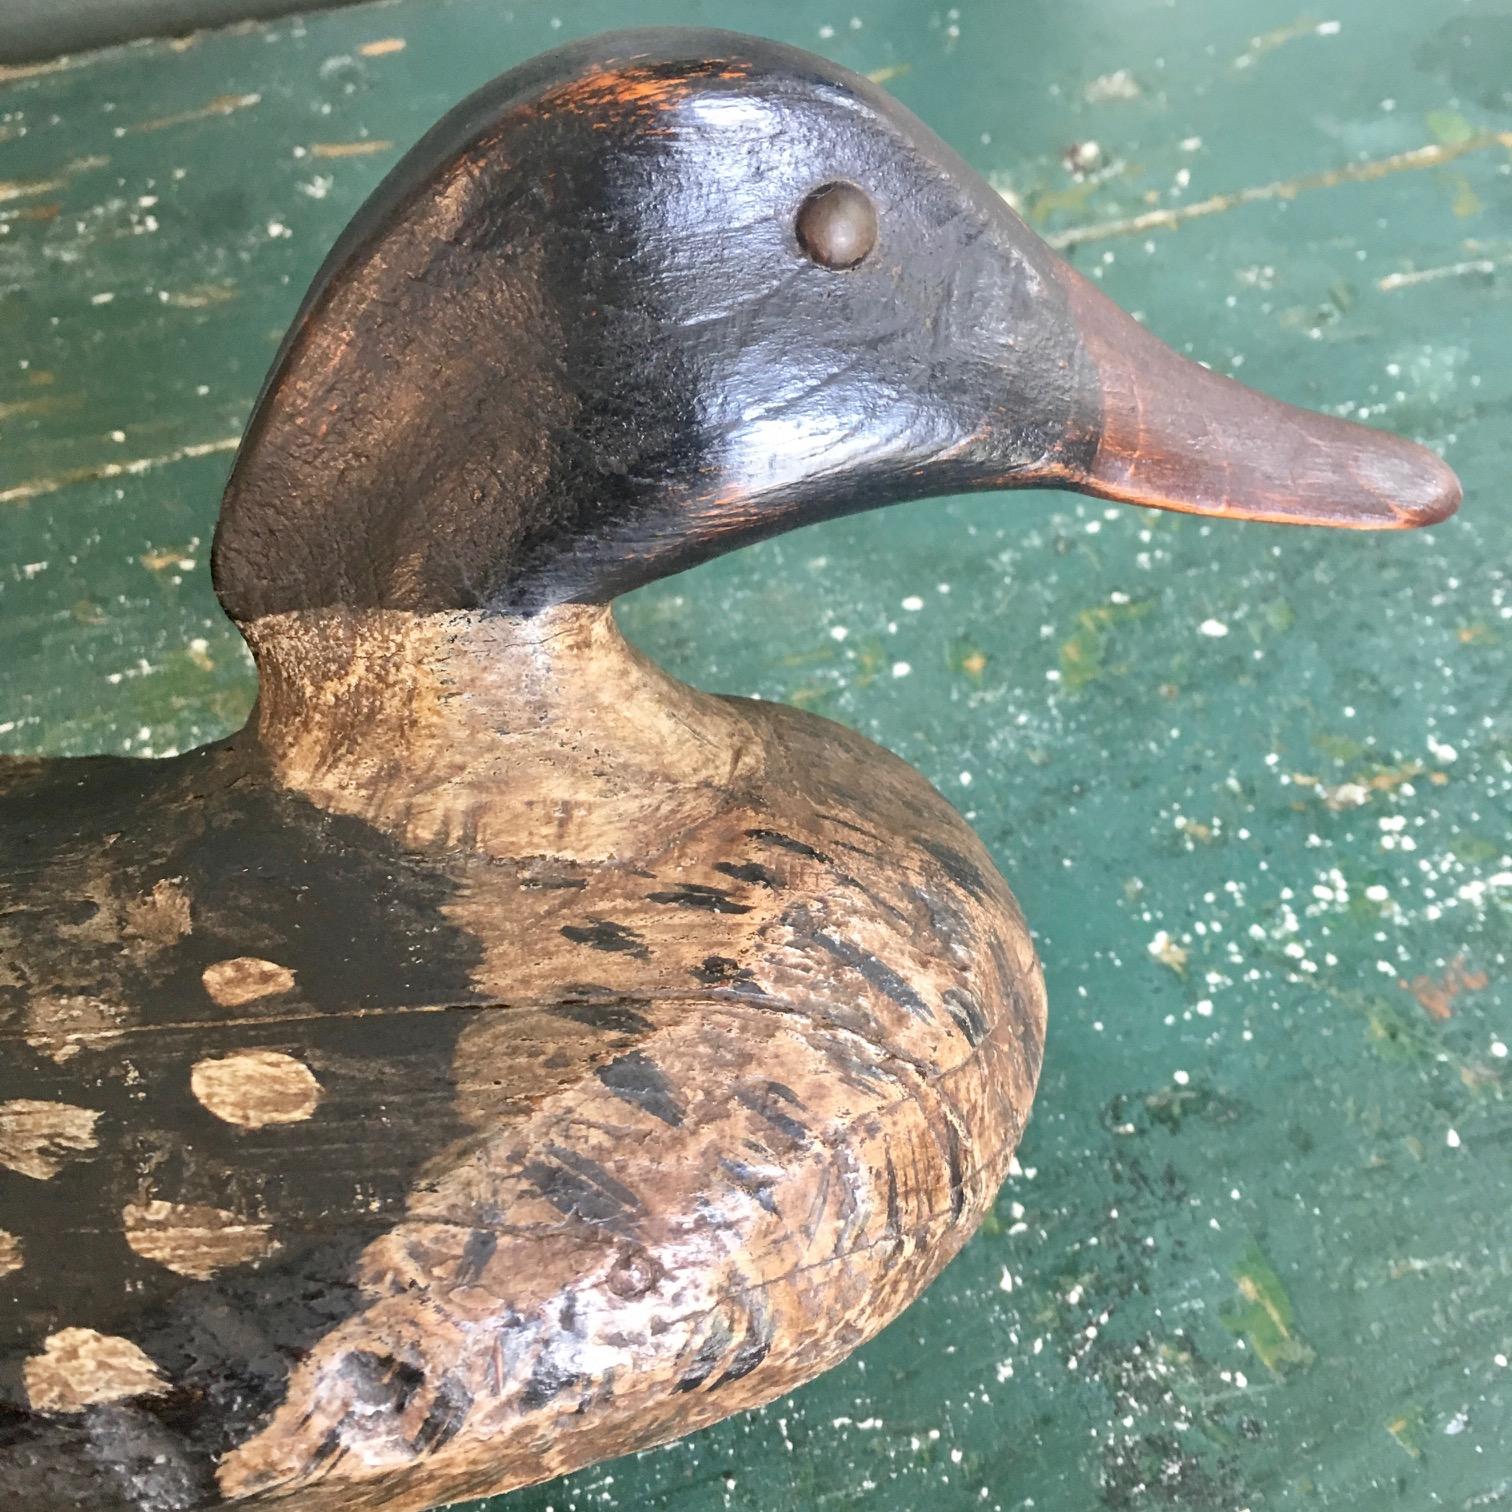 Early Massachusetts or Maine Red-Breasted Merganser Drake Decoy, circa 1900, in old working paint, having a slender racy head with tack eyes and a slightly snaky neck, set with flared base firmly onto the body; the body itself also has a somewhat